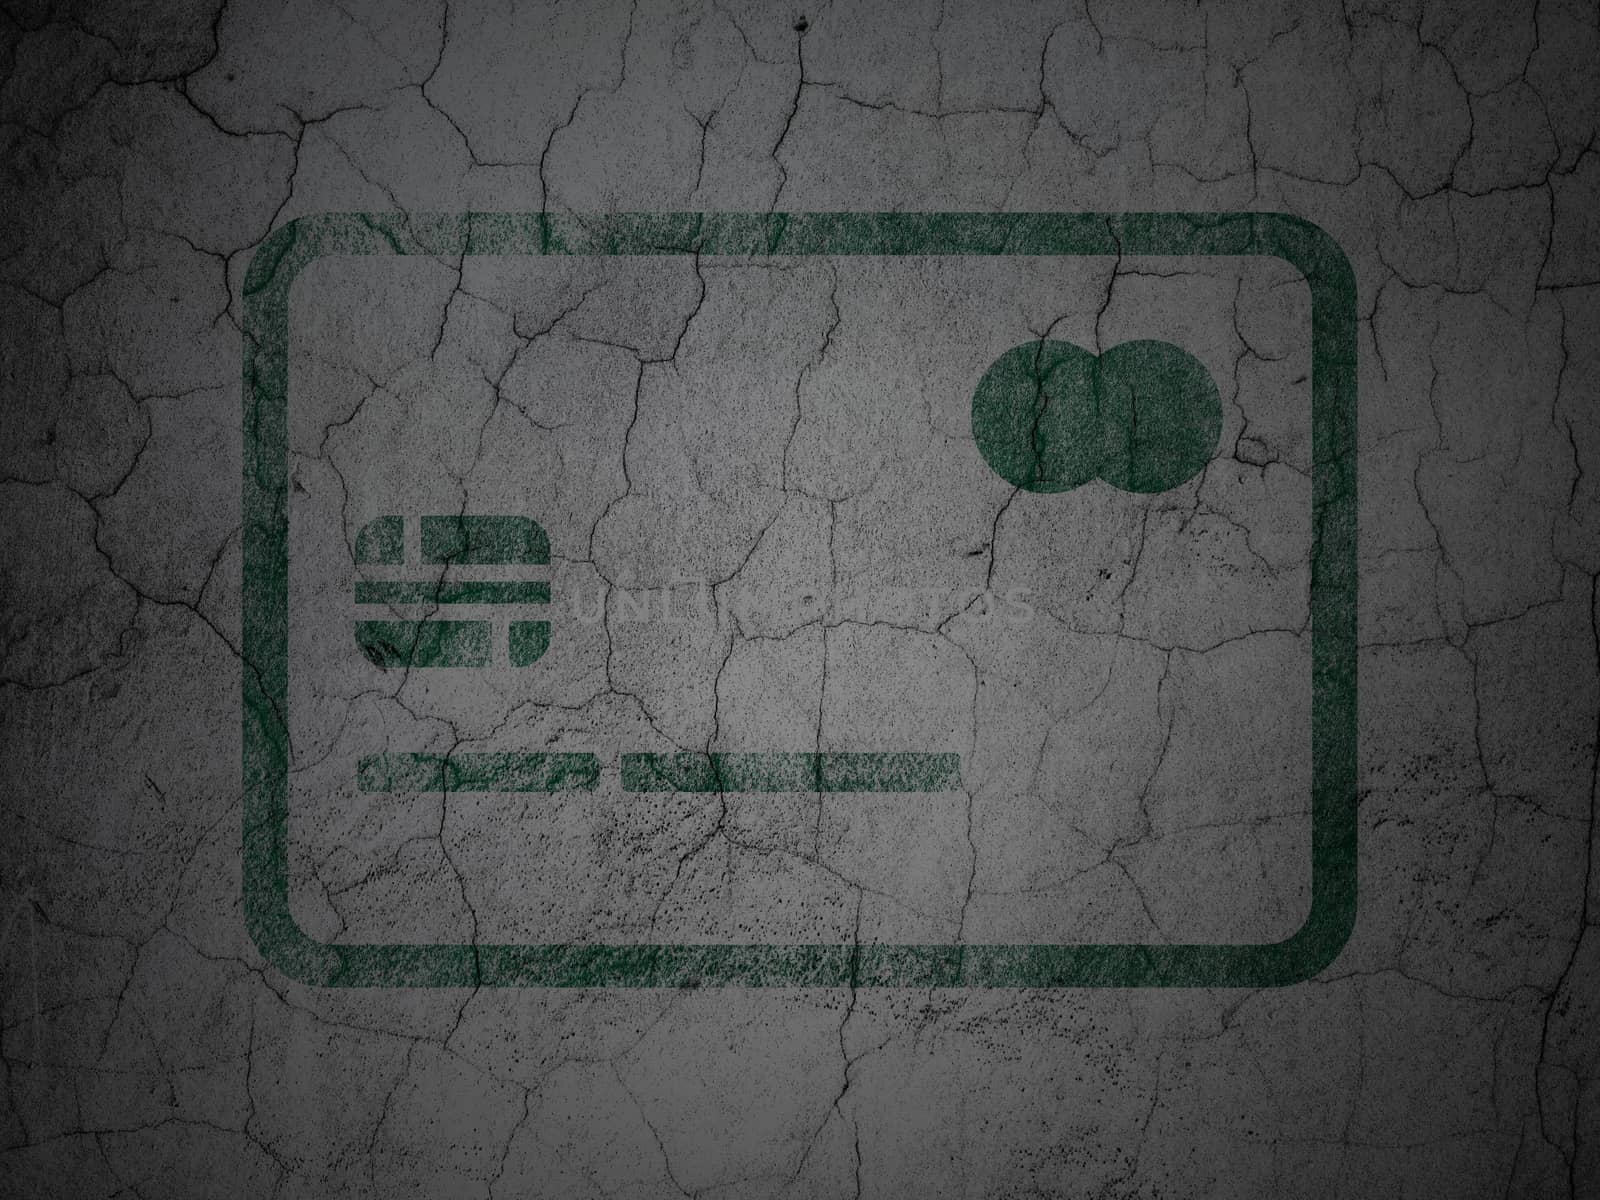 Finance concept: Green Credit Card on grunge textured concrete wall background